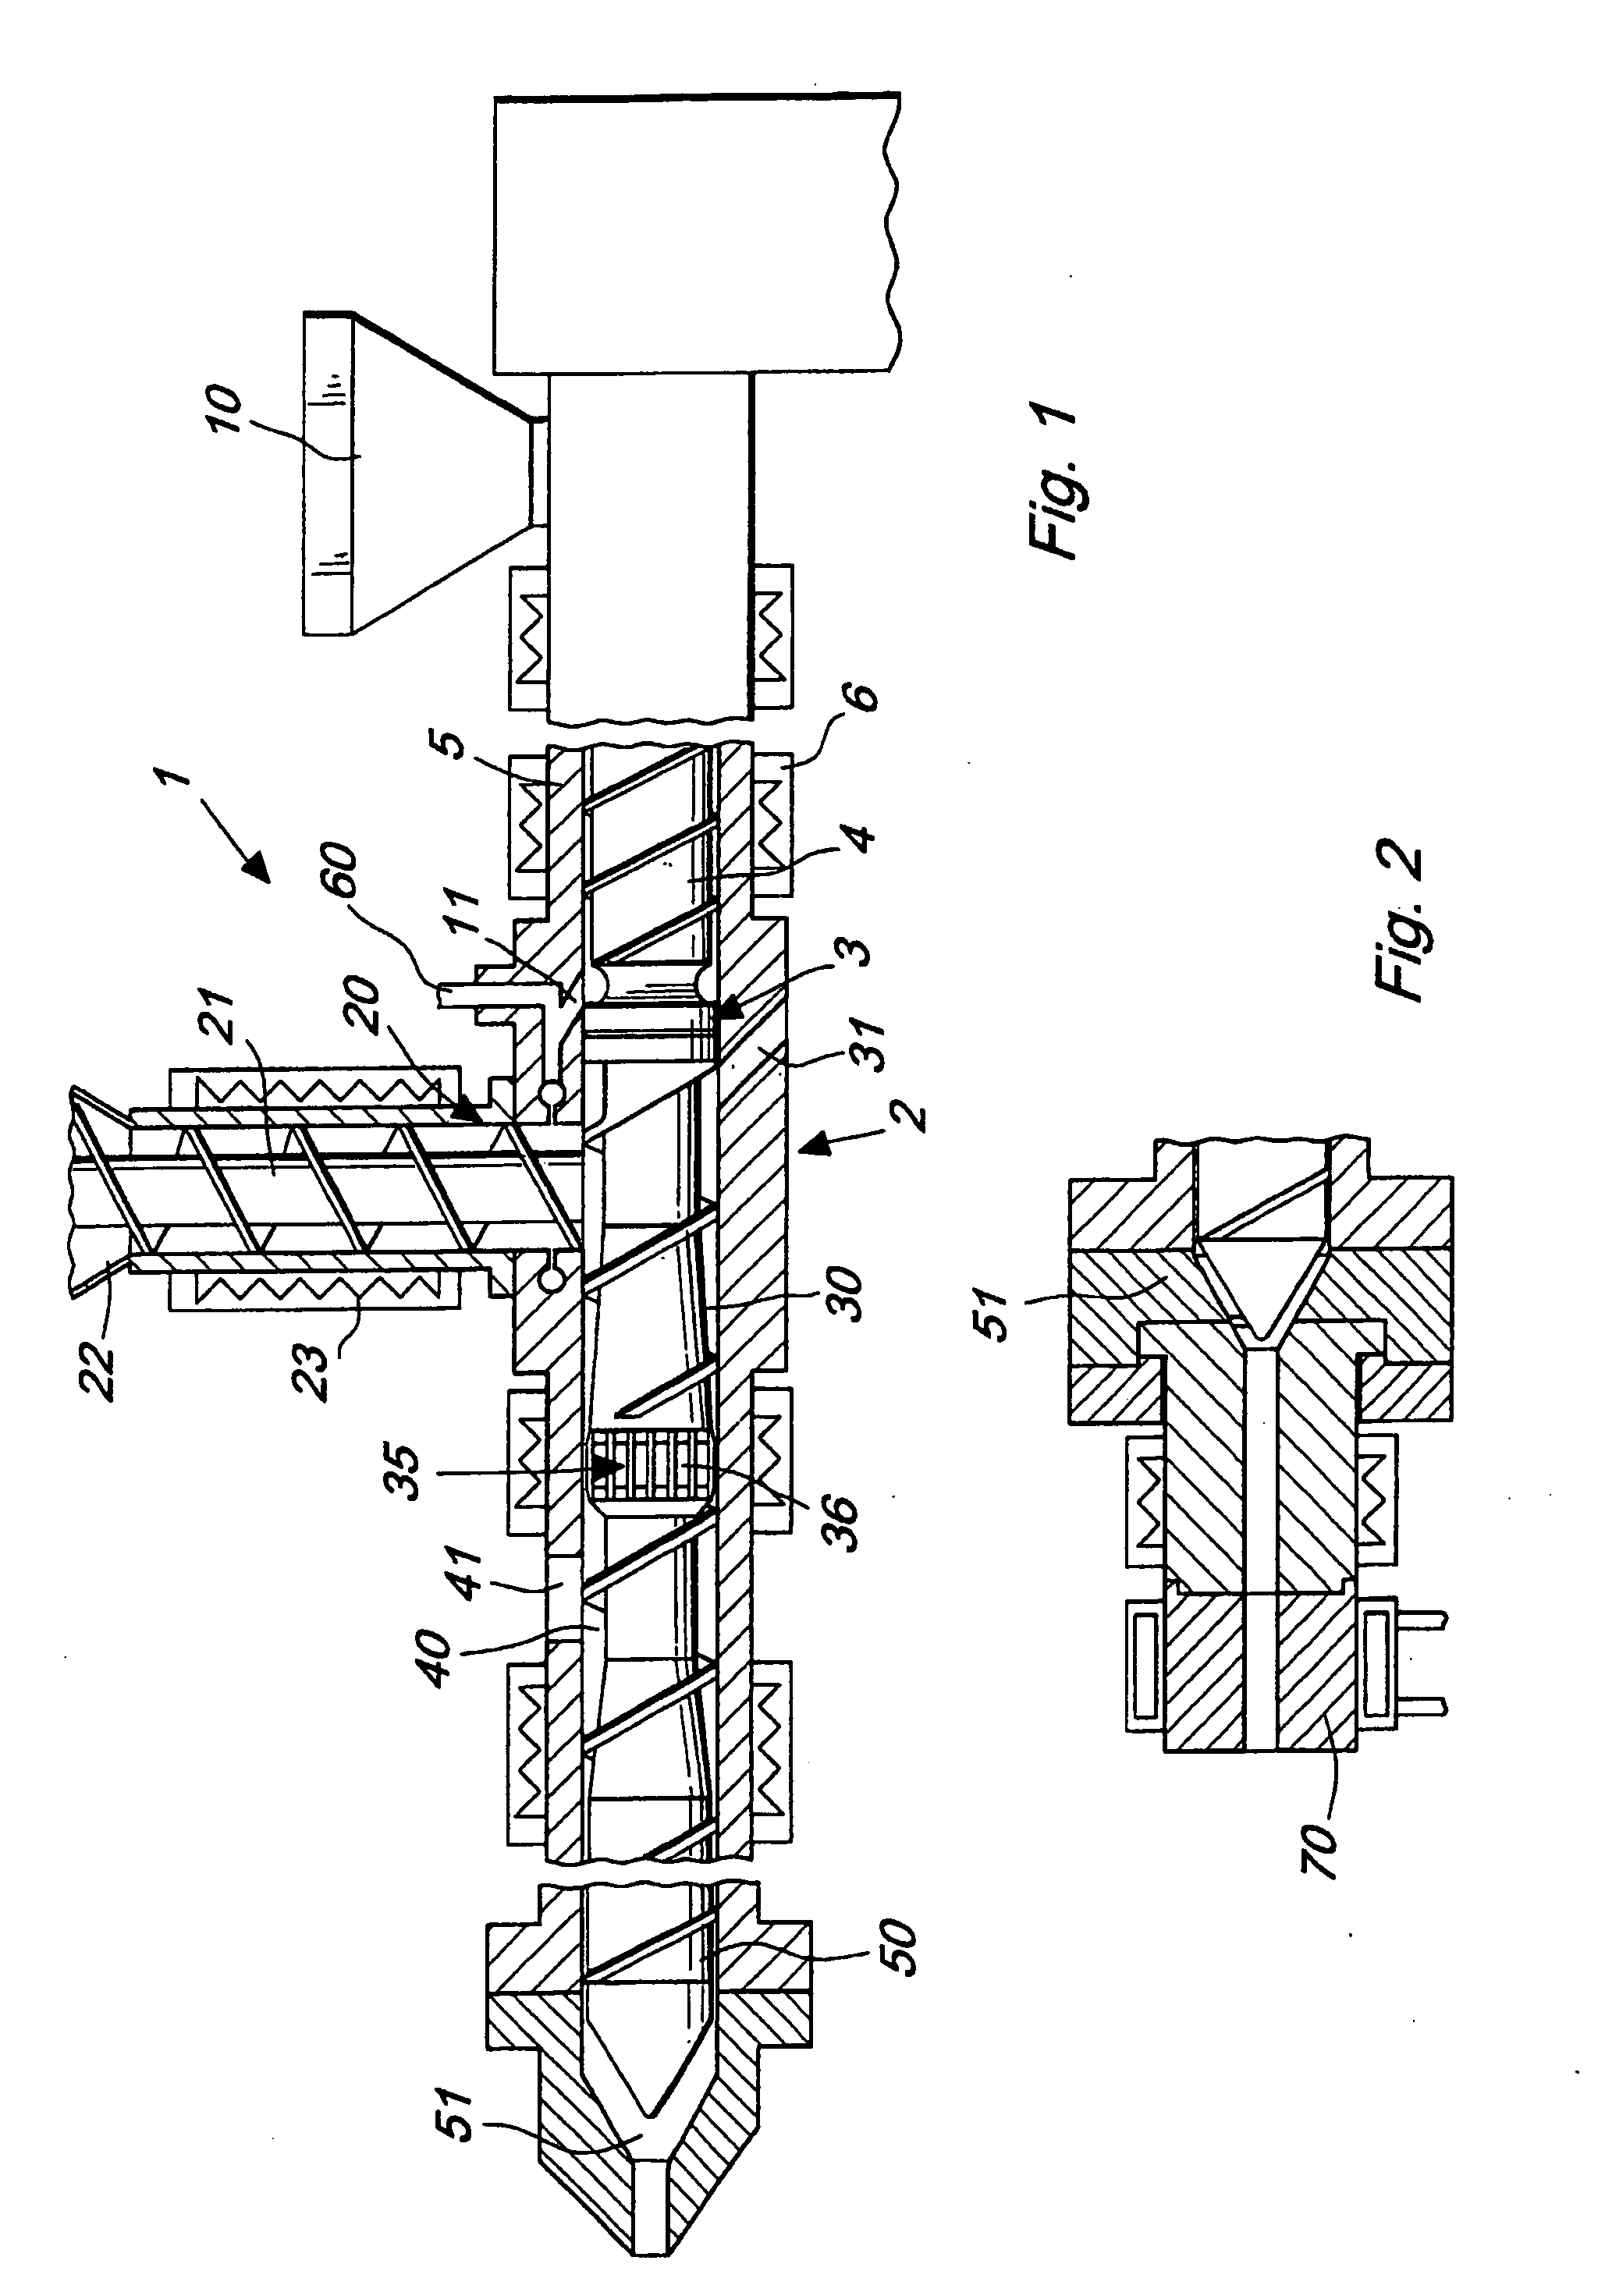 Method for producing composite materials such as thermoplastic resins with mineral and/or vegetable fillers